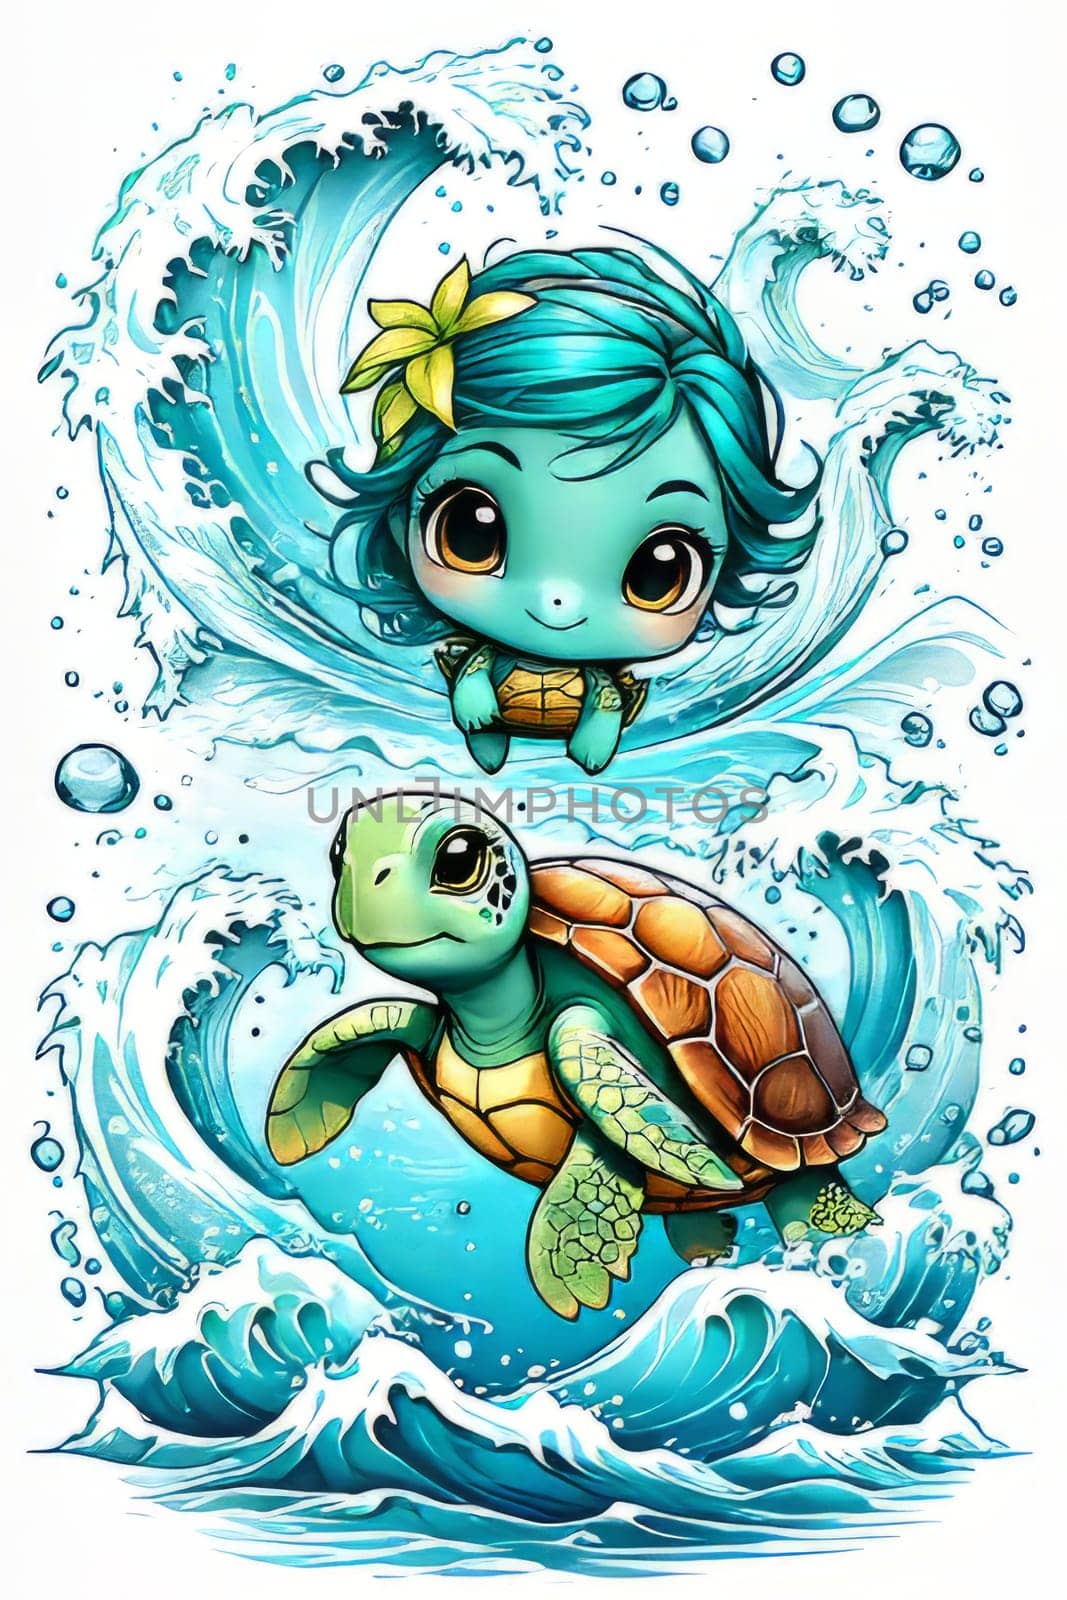 Cartoon girl with turtle, whimsical and playful scene where girl appears cheerful, turtle seems content in endearing position. For Tshirt design, poster, postcard, childrens book, tourism, stationery. by Angelsmoon